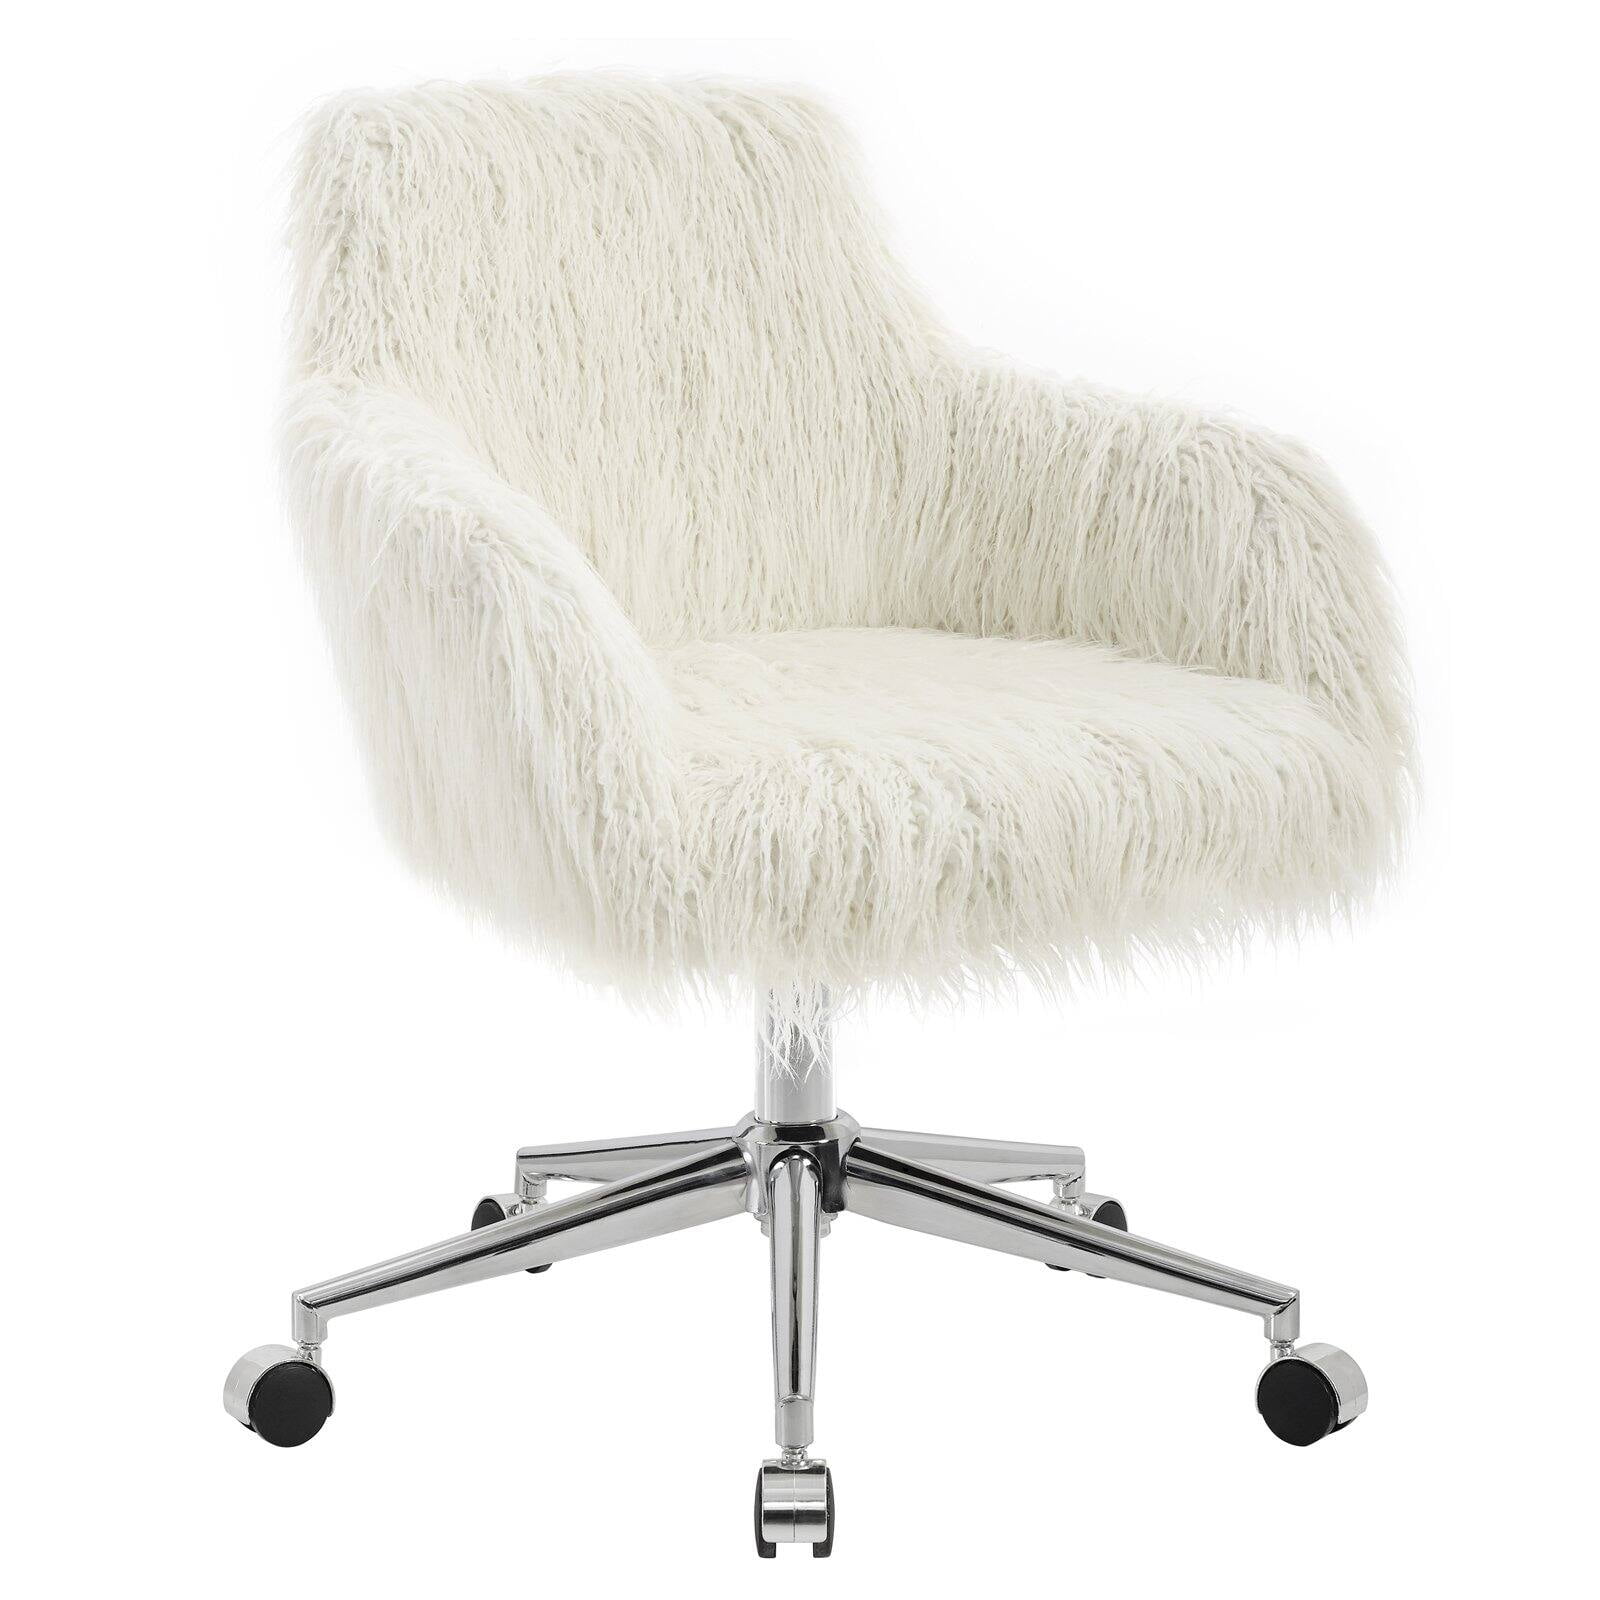 Linon Fiona Faux Fur Office Chair,1620 in. Adjustable